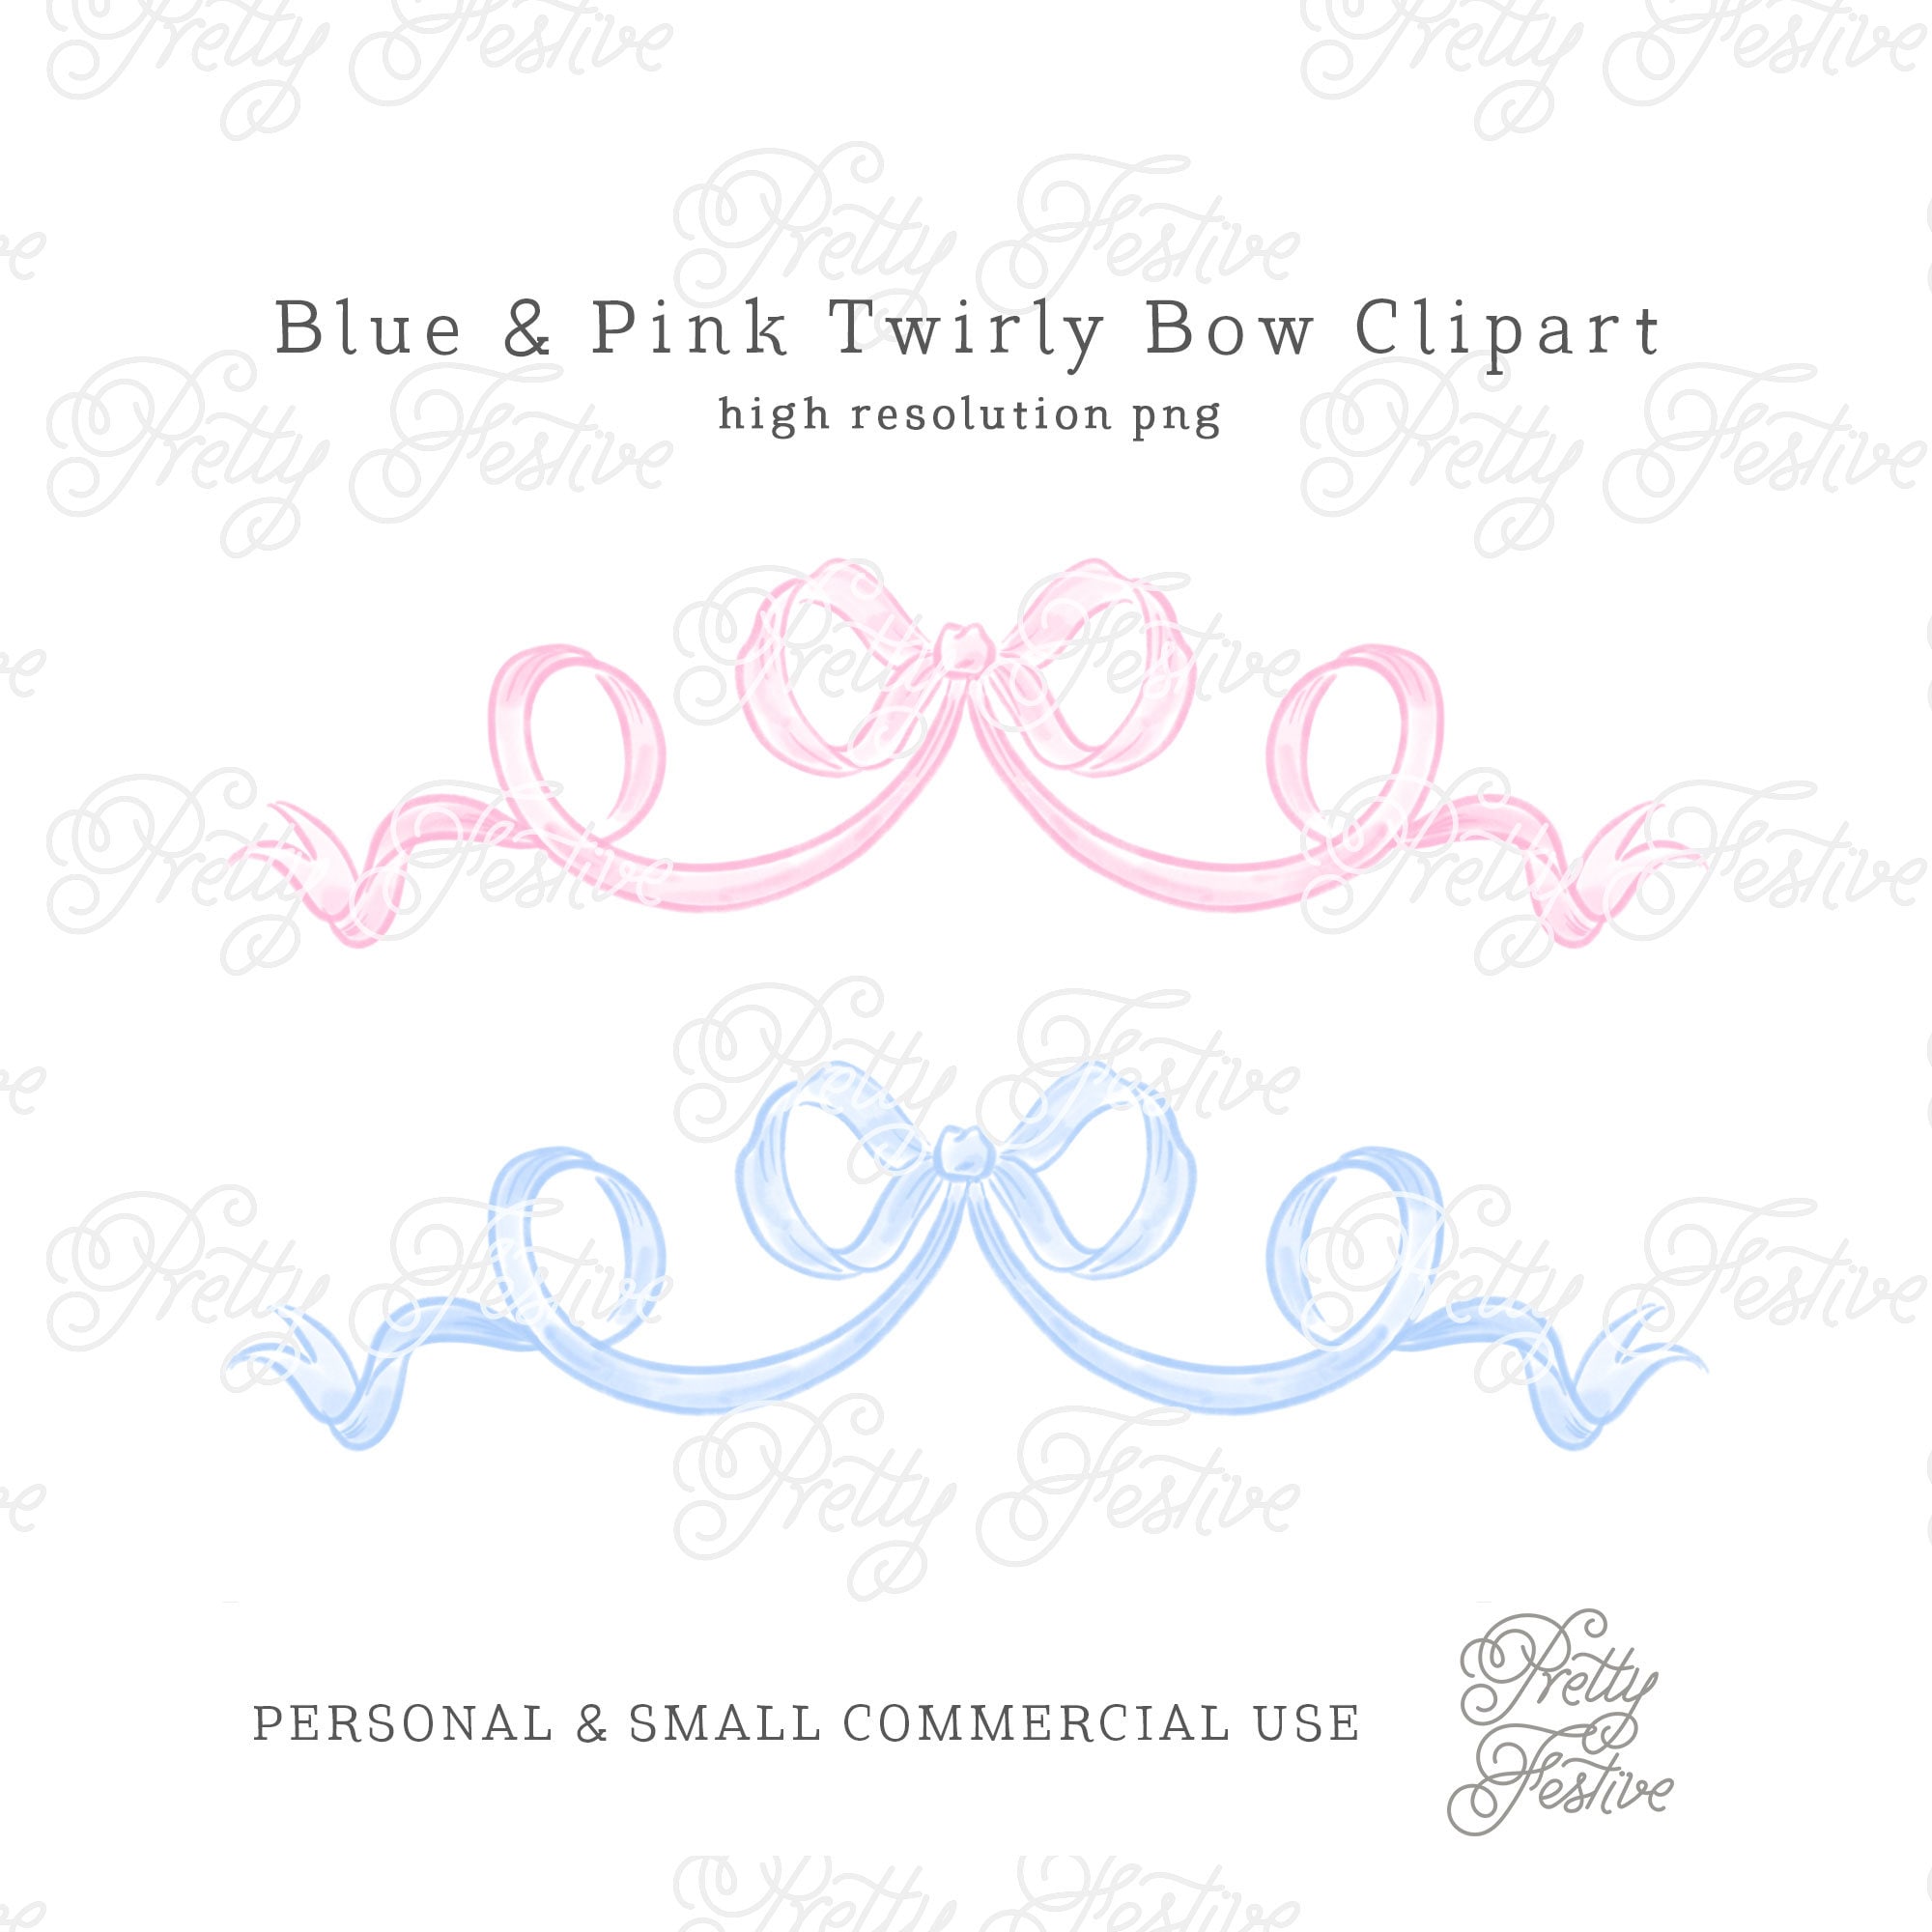 Antique Images: Free Baby Clip Art: Vintage Baby Scrapbooking Elements Pink  Ribbon